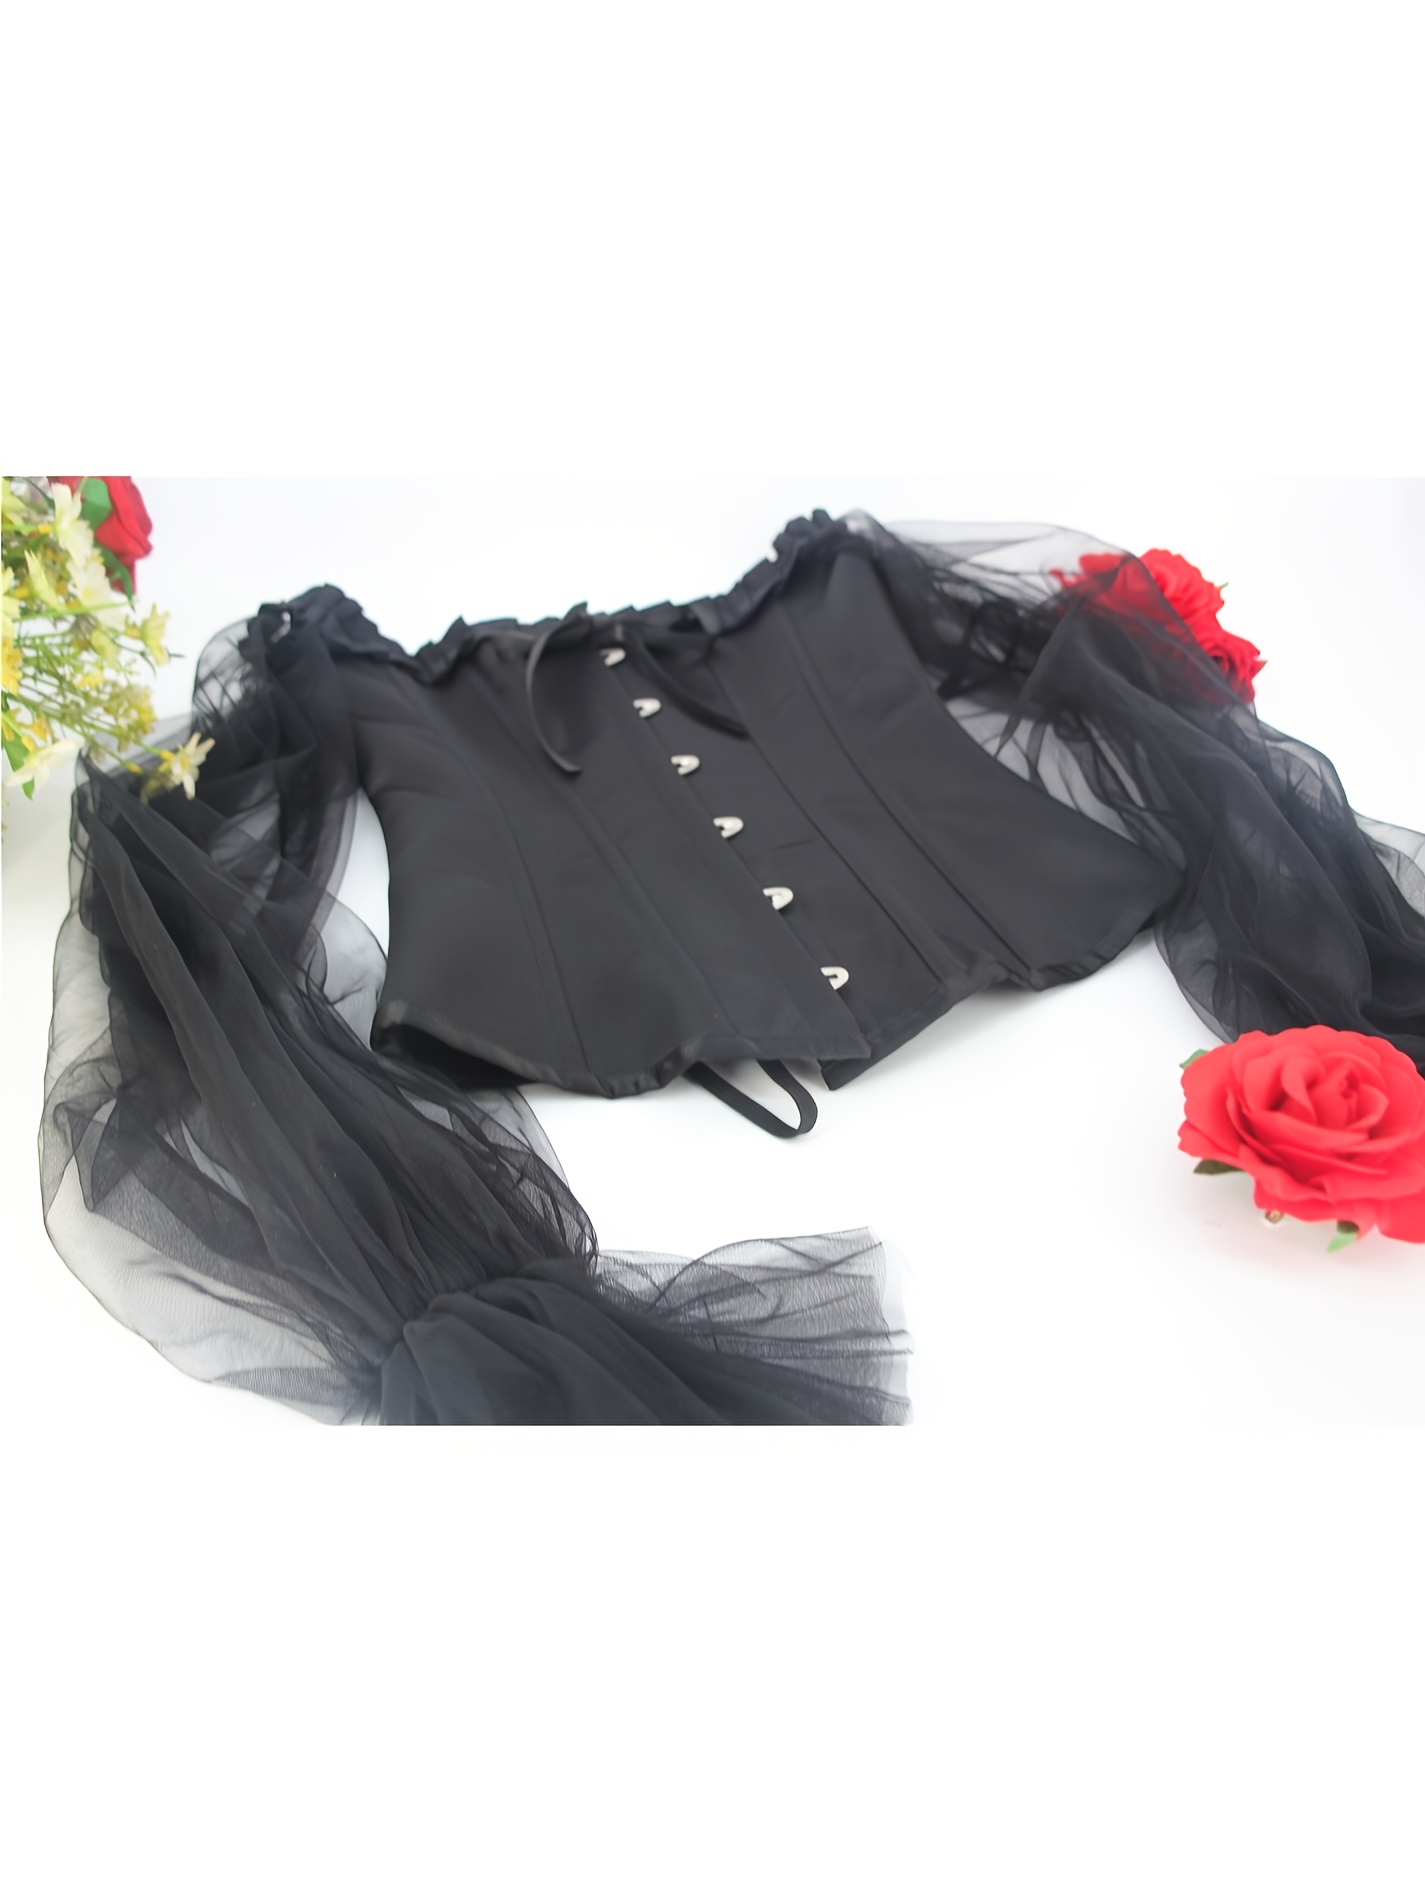 Lady Off Shoulder Sexy Chic Blouse Corset Tops Bustiers Long